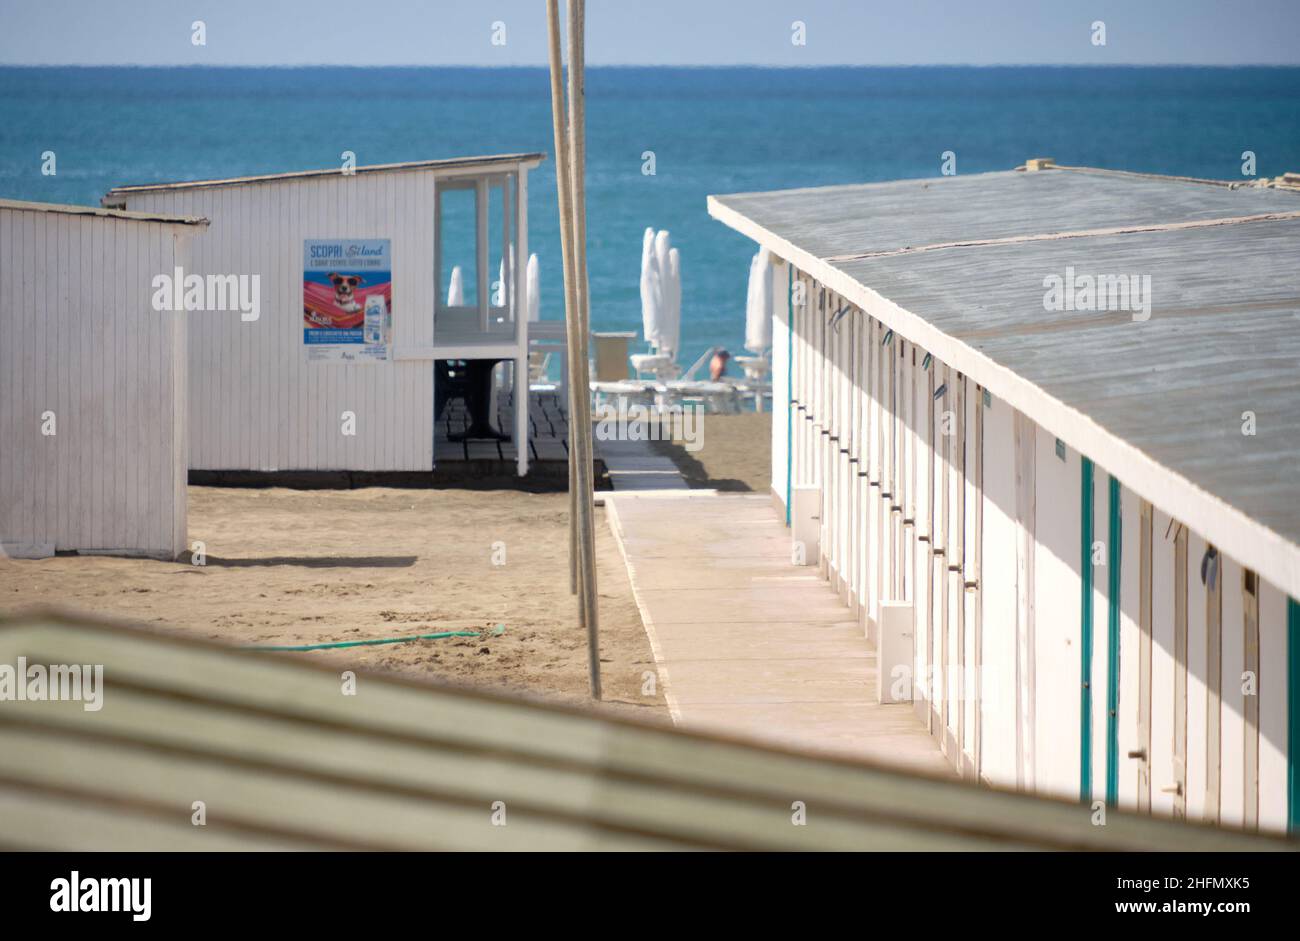 Mauro Scrobogna /LaPresse July 18, 2020&#xa0; Rome, Italy News Covid - closure of the bathing establishment in Ostia In the photo: La Vela bathing establishment, Lungomare Amerigo Vespucci in Ostia closed by the health authorities in the case of a chef from Bangladesh who tested positive for the virus. Stock Photo